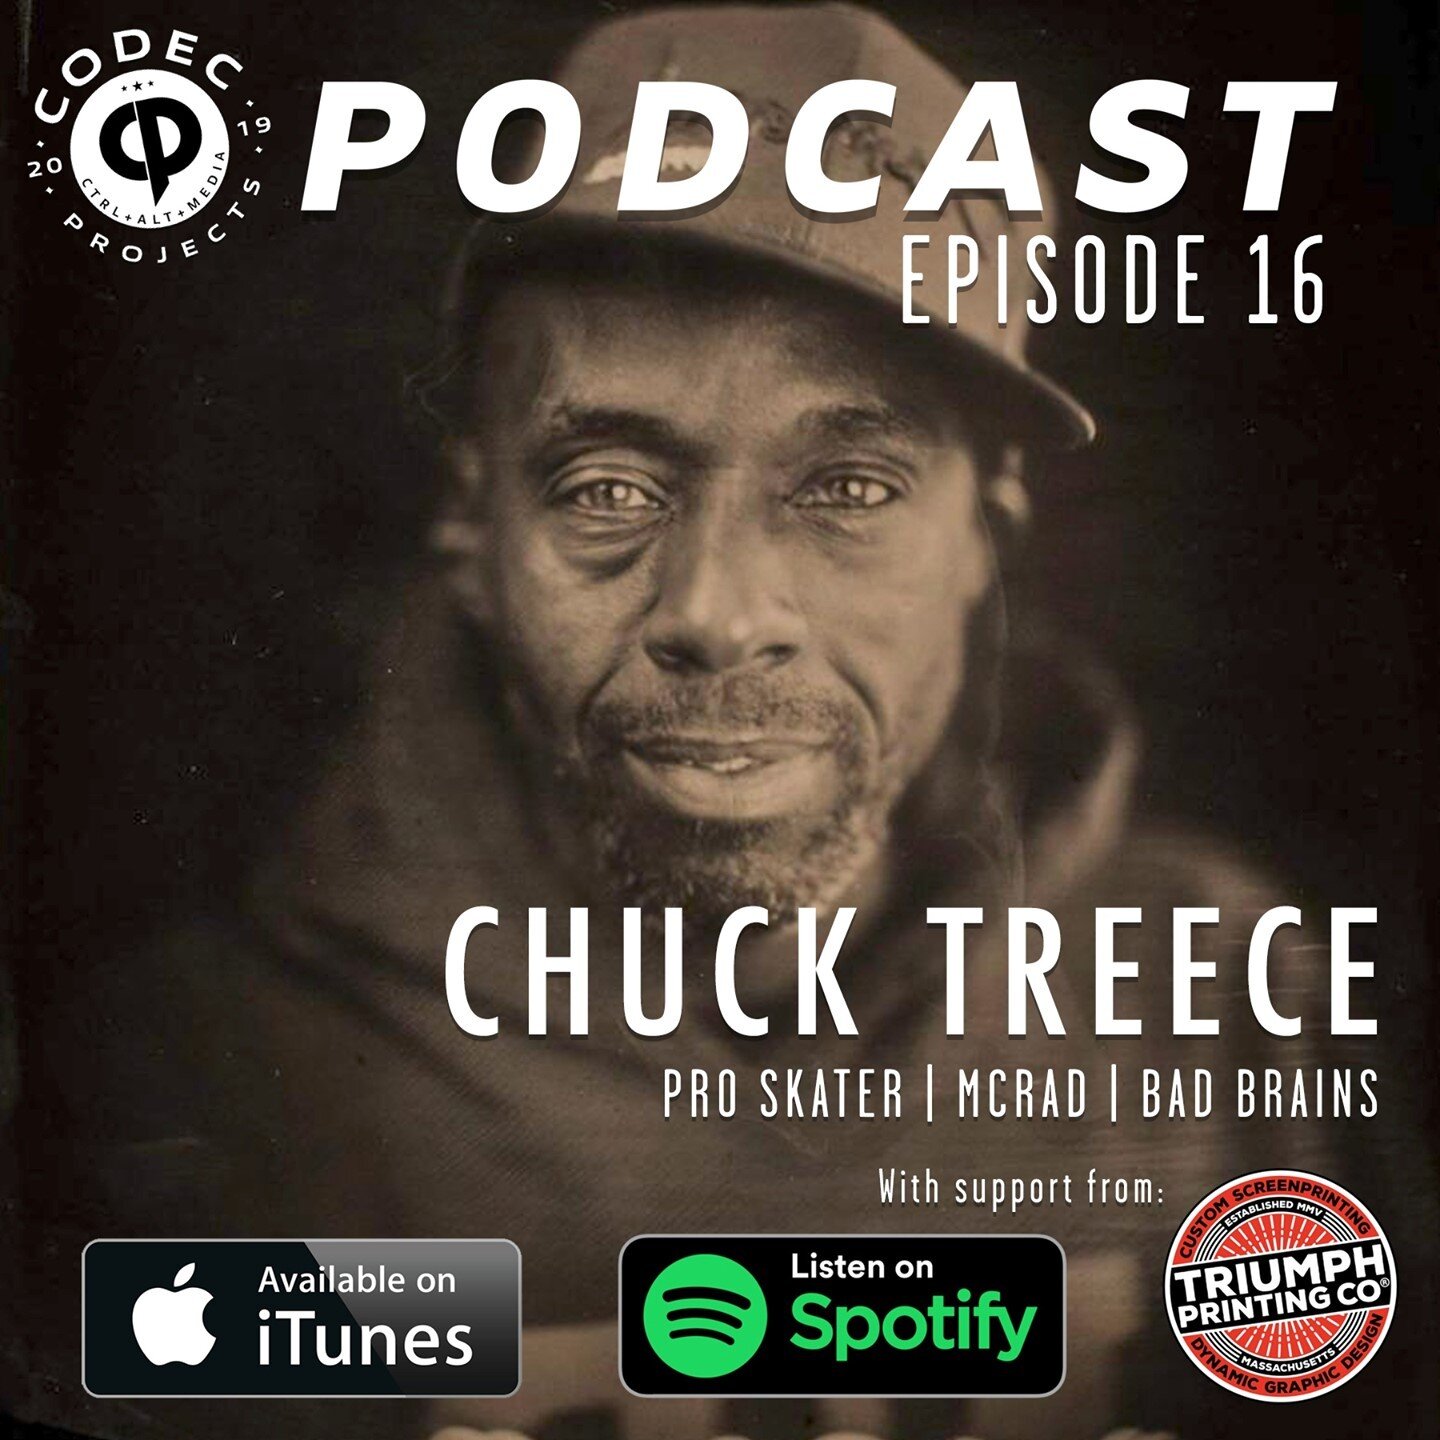 Codec Projects - S1E16 - Chuck Treece - Pro Skater | McRad | Bad Brains⁠
⁠
We talk about how he got into punk and hardcore and skateboarding, growing up in Wilmington, DE, turning pro, working with Stacy Peralta, McRad, Bad Brains, being a studio mus